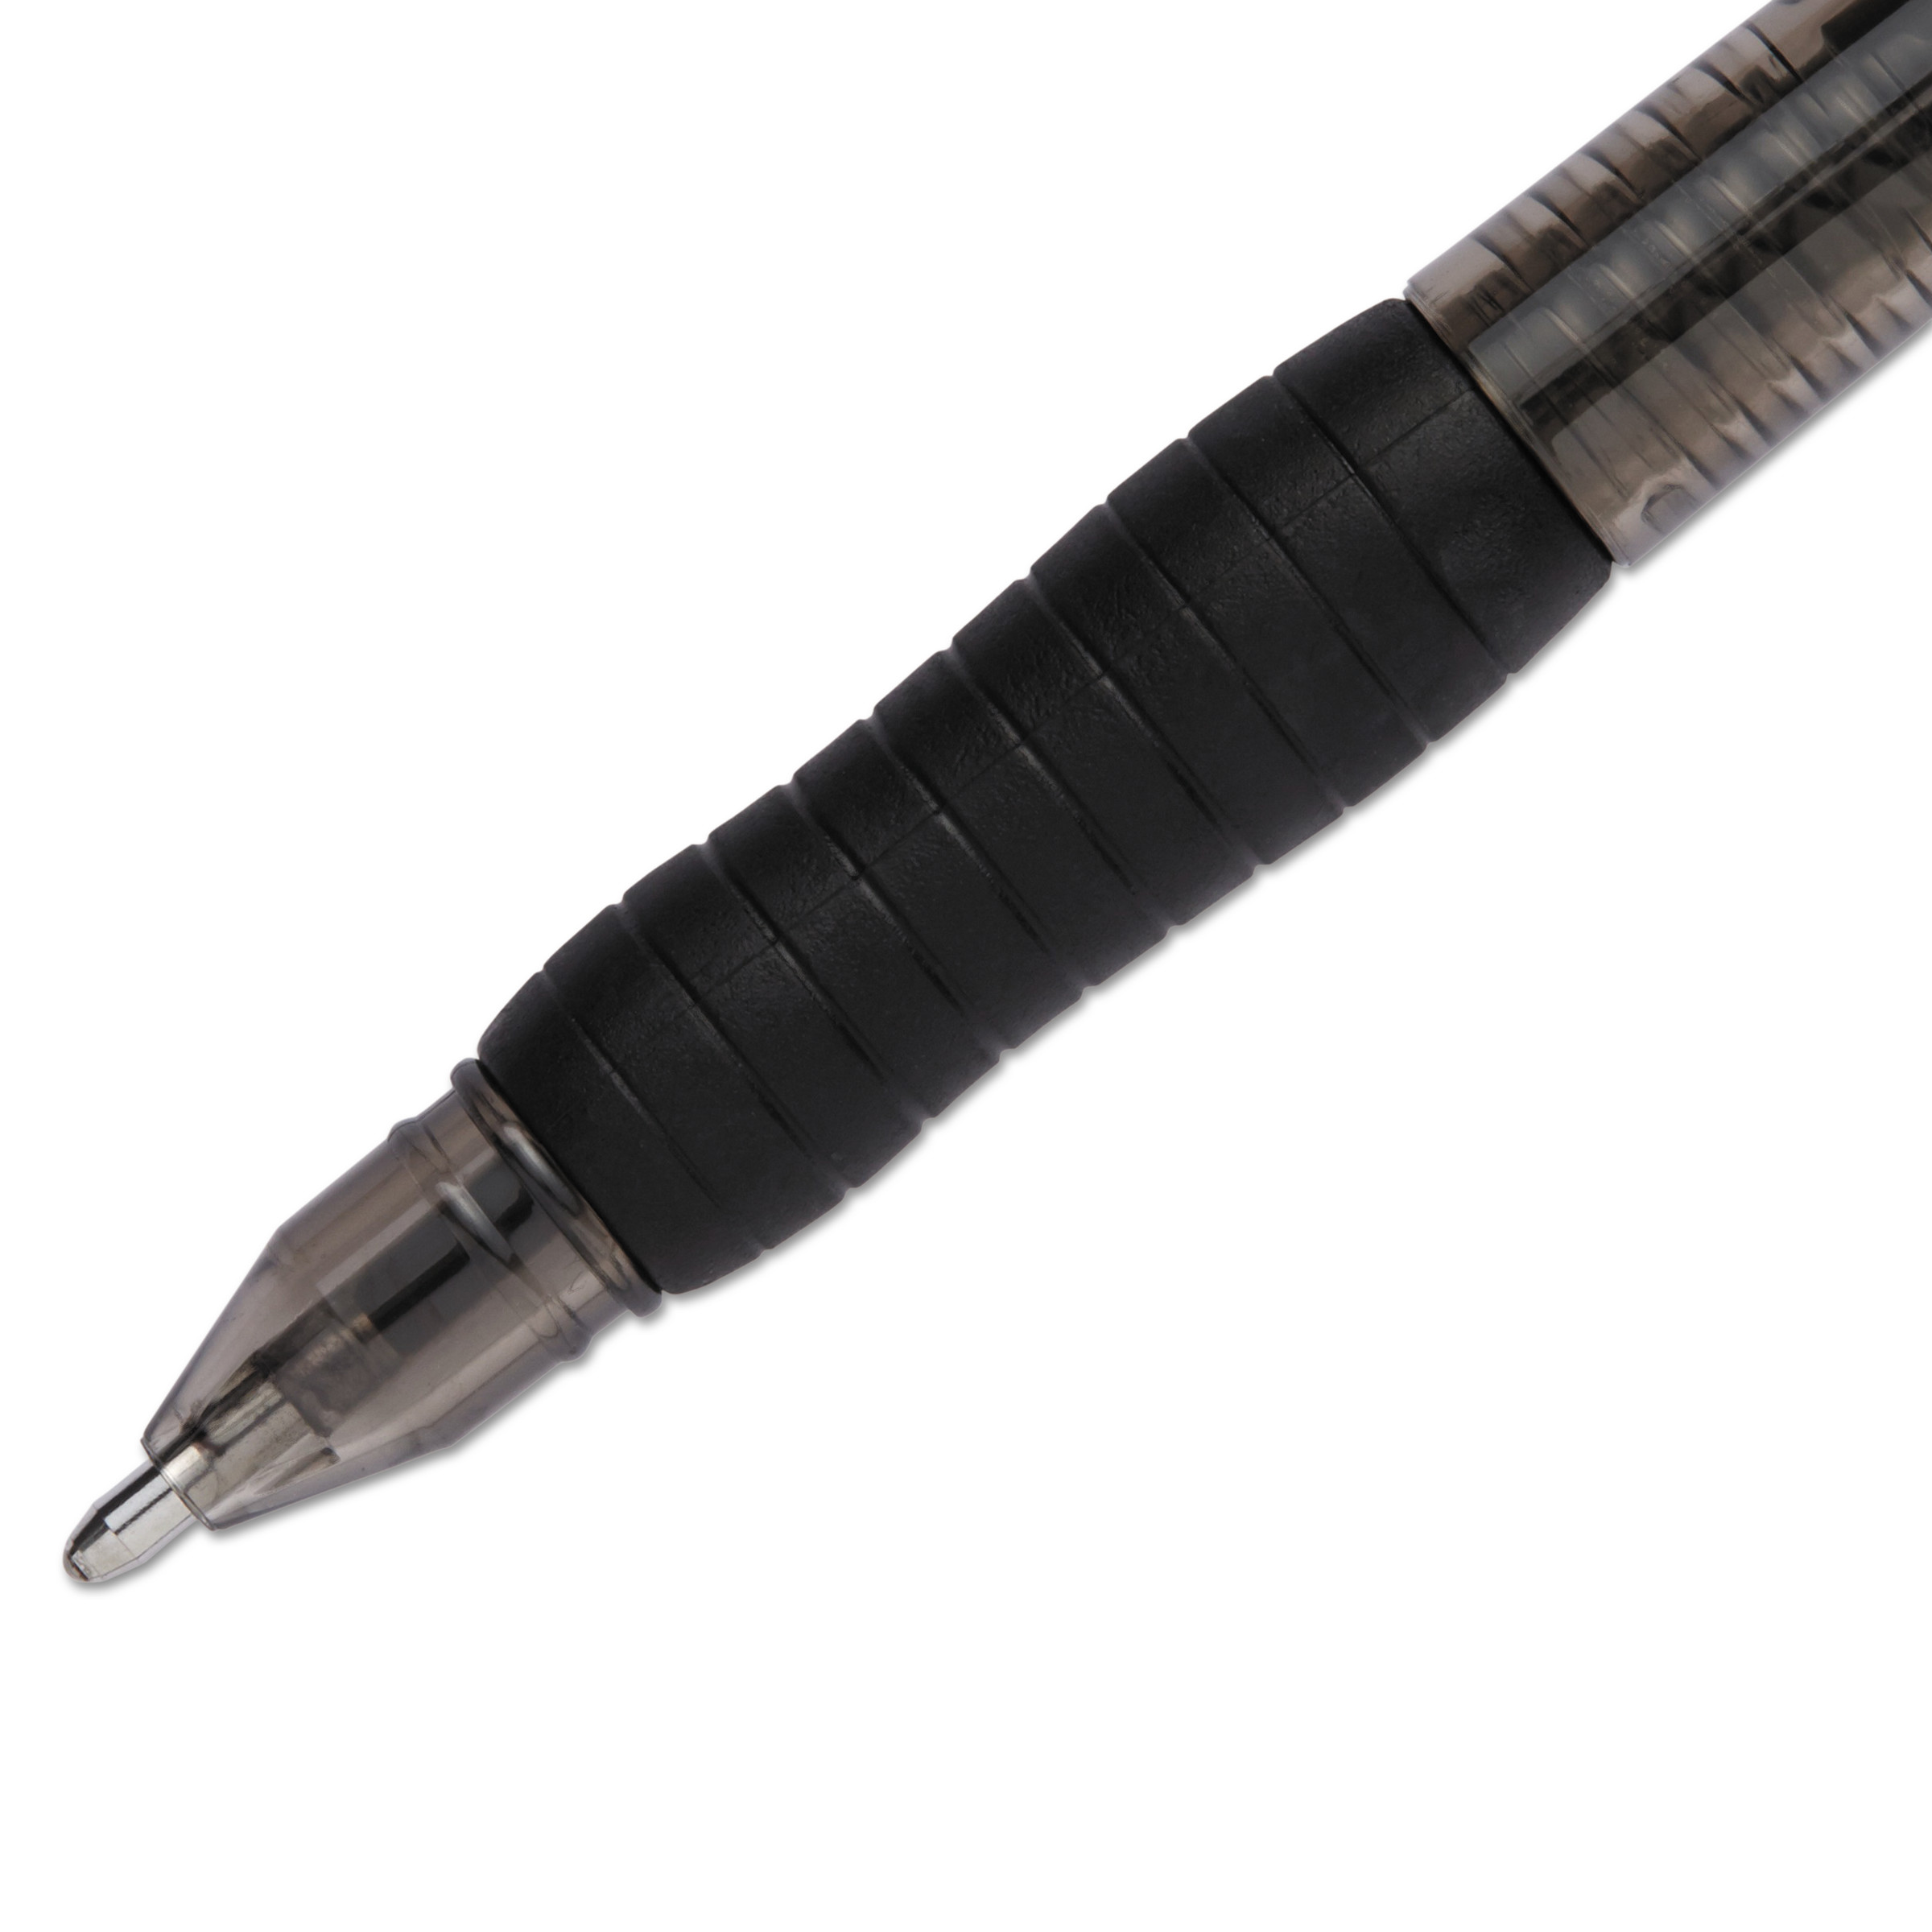 Paper Mate Profile Ballpoint Pen, 1.4 mm Bold Tip, Black, Pack of 12 - image 4 of 5